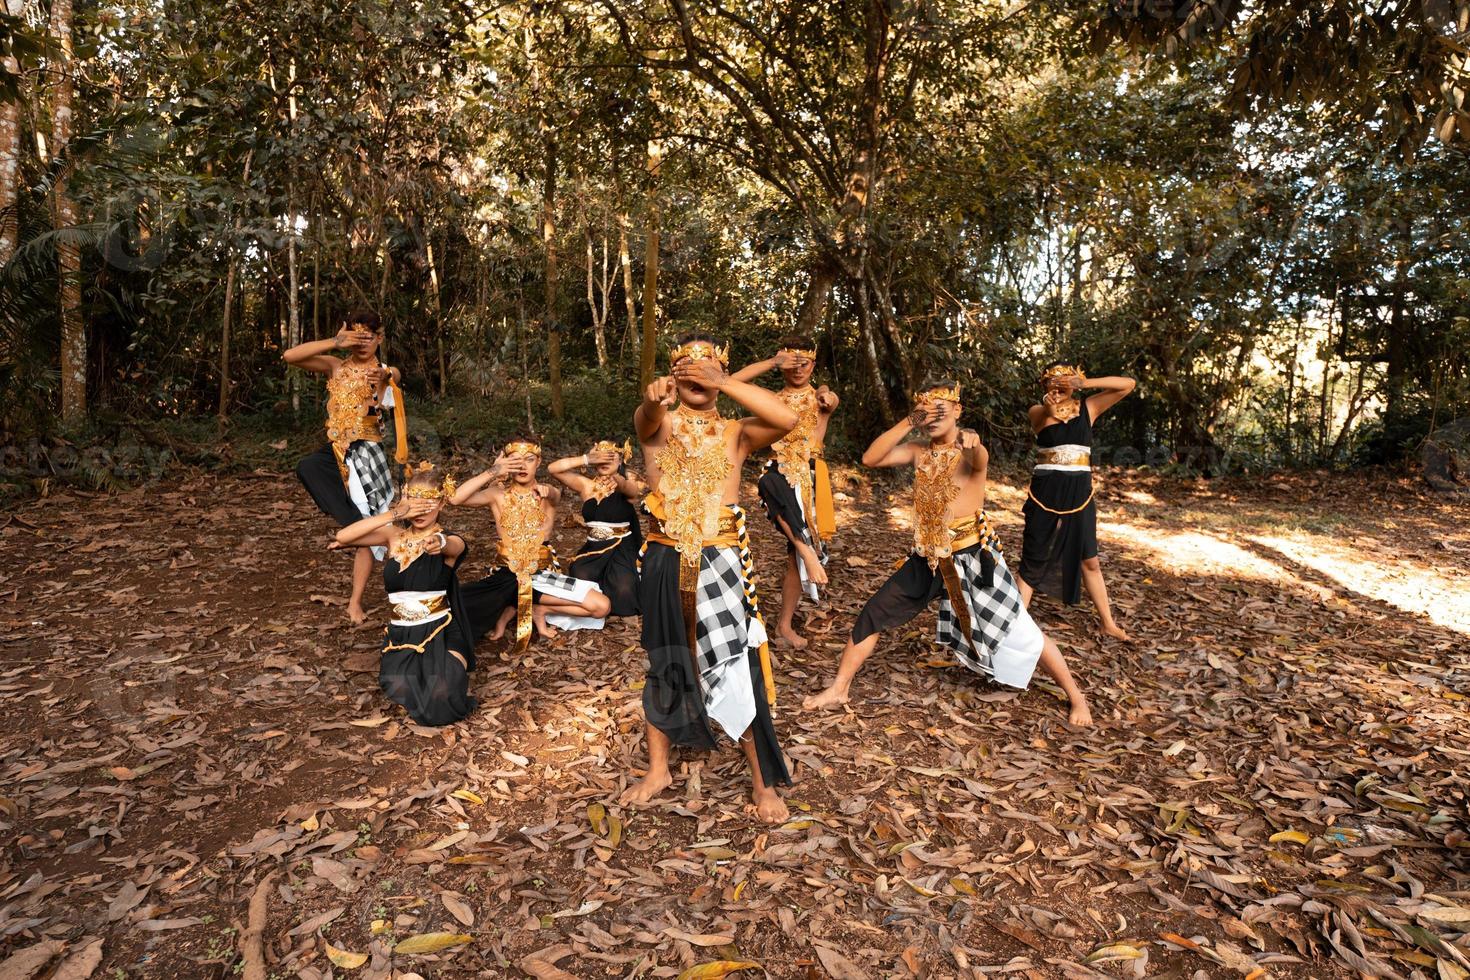 Balinese dancers with golden costumes and stripped pants dance together with the dead brown leaves in the yard photo